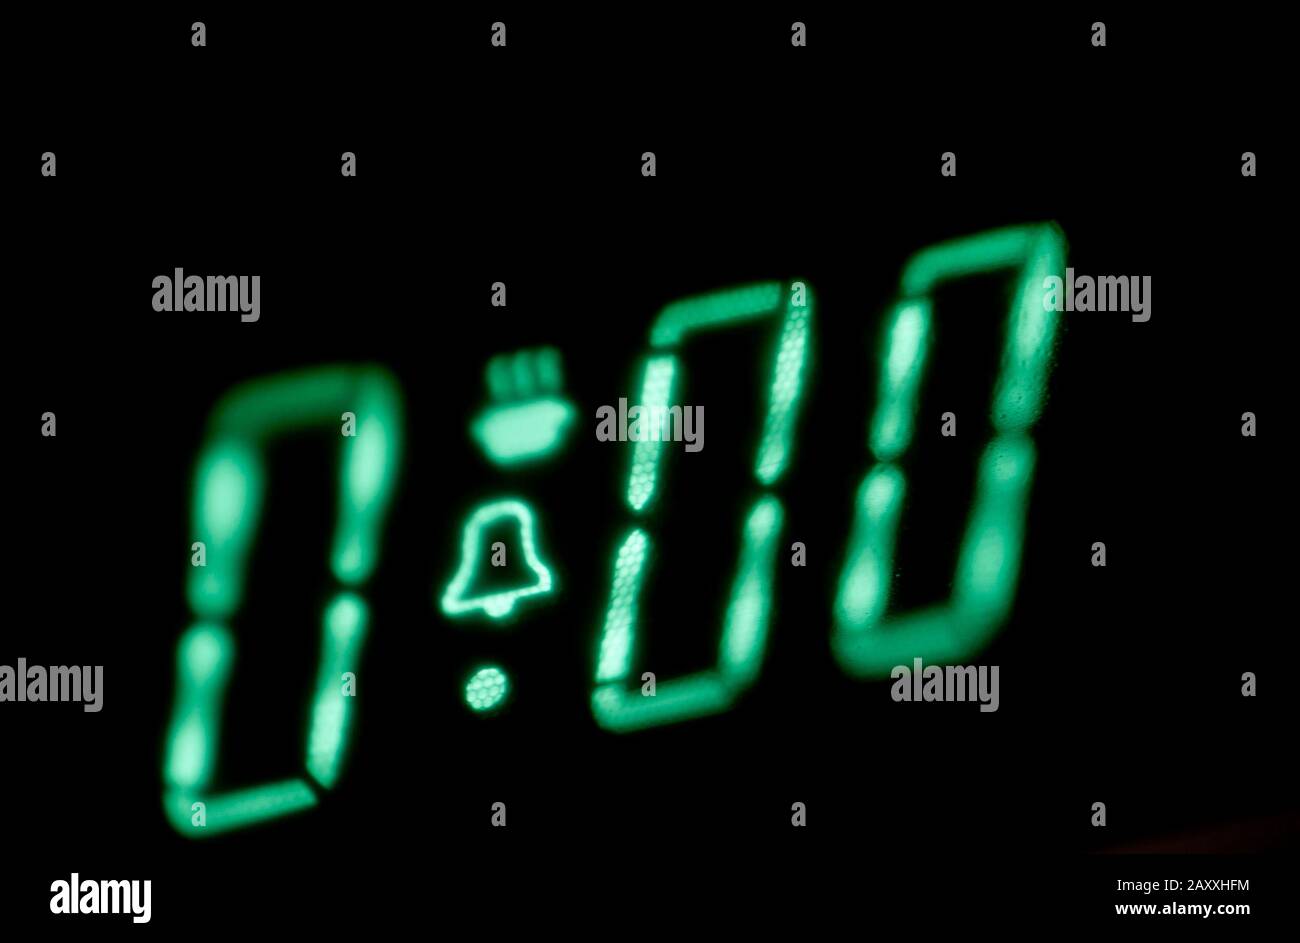 https://c8.alamy.com/comp/2AXXHFM/illuminated-digital-oven-timer-showing-zero-cooking-time-remaining-for-the-contents-of-the-oven-2AXXHFM.jpg